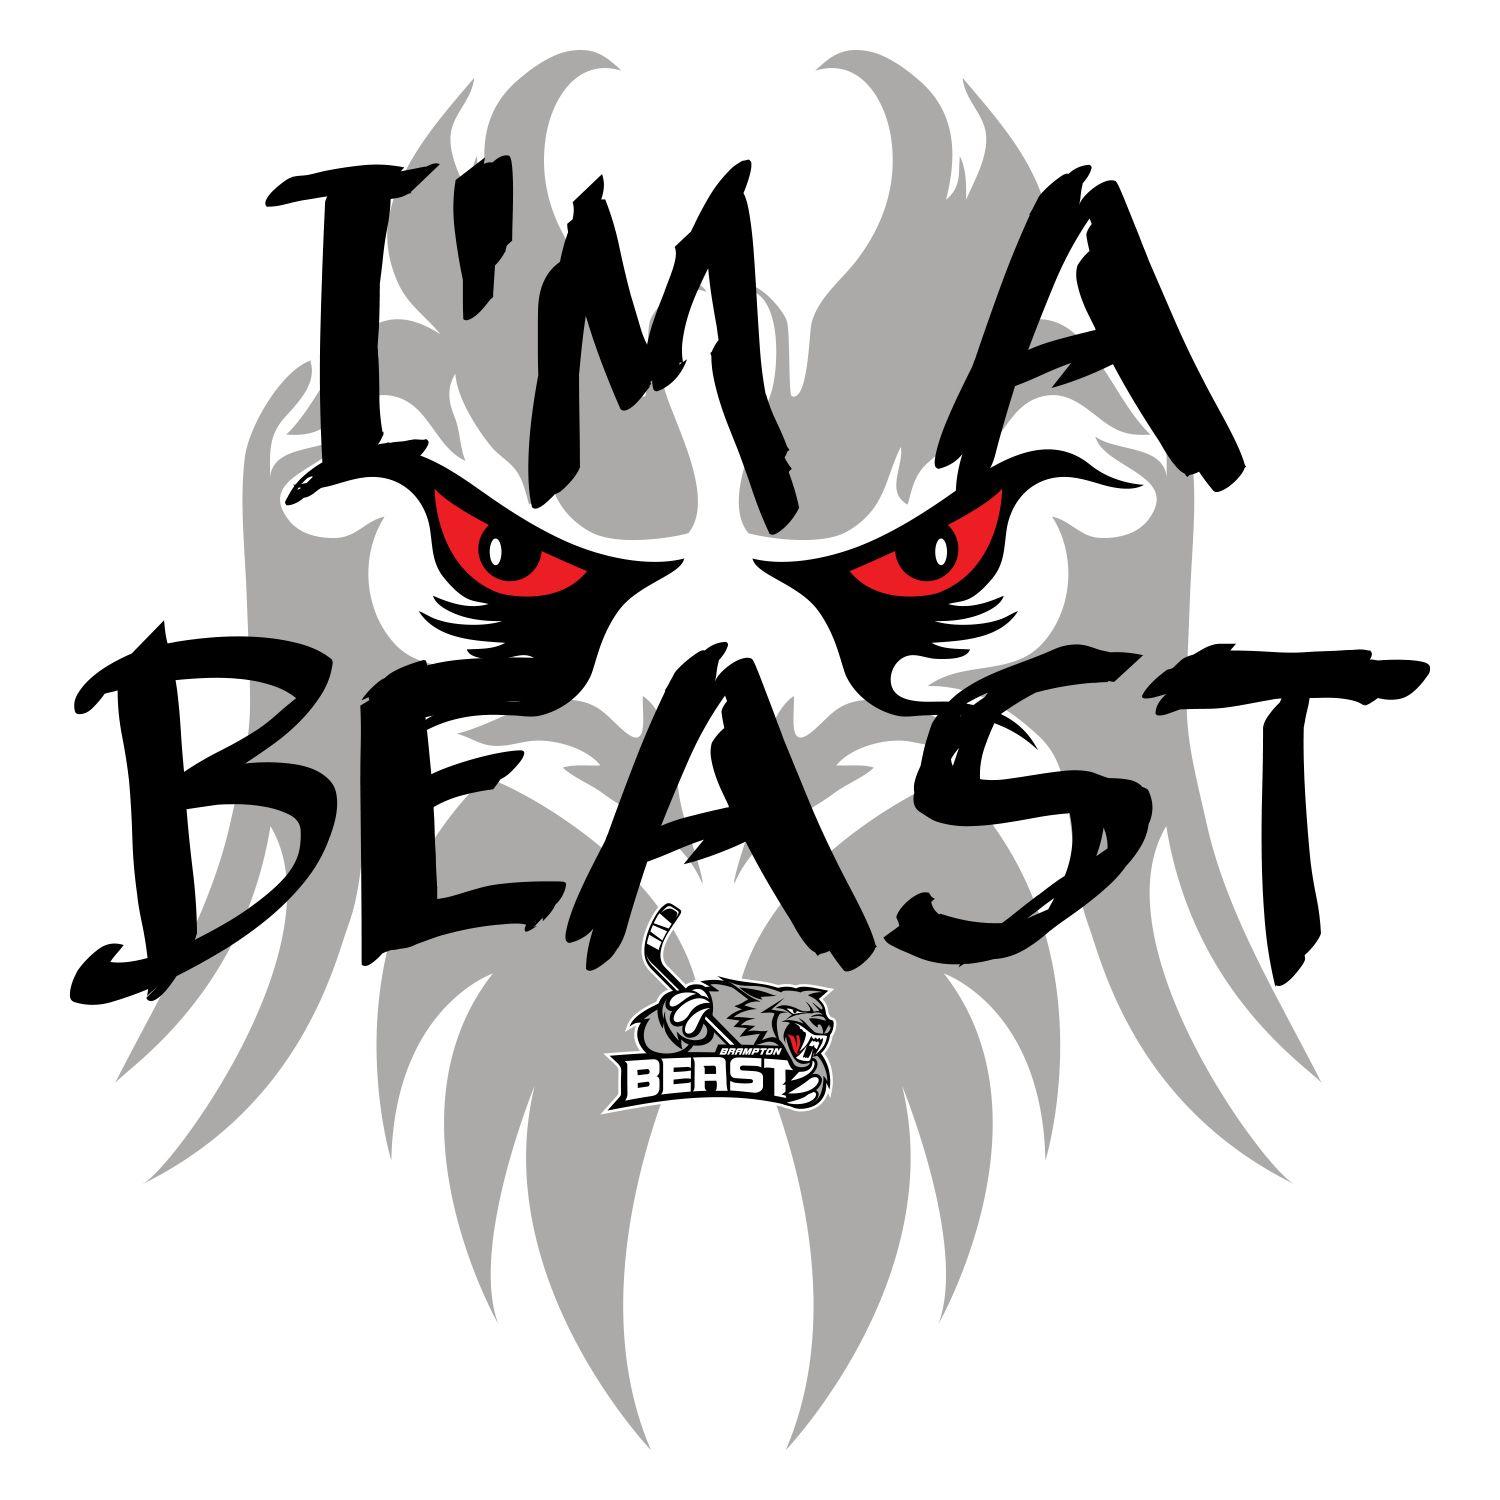 Beast logo sticker in custom colors and sizes